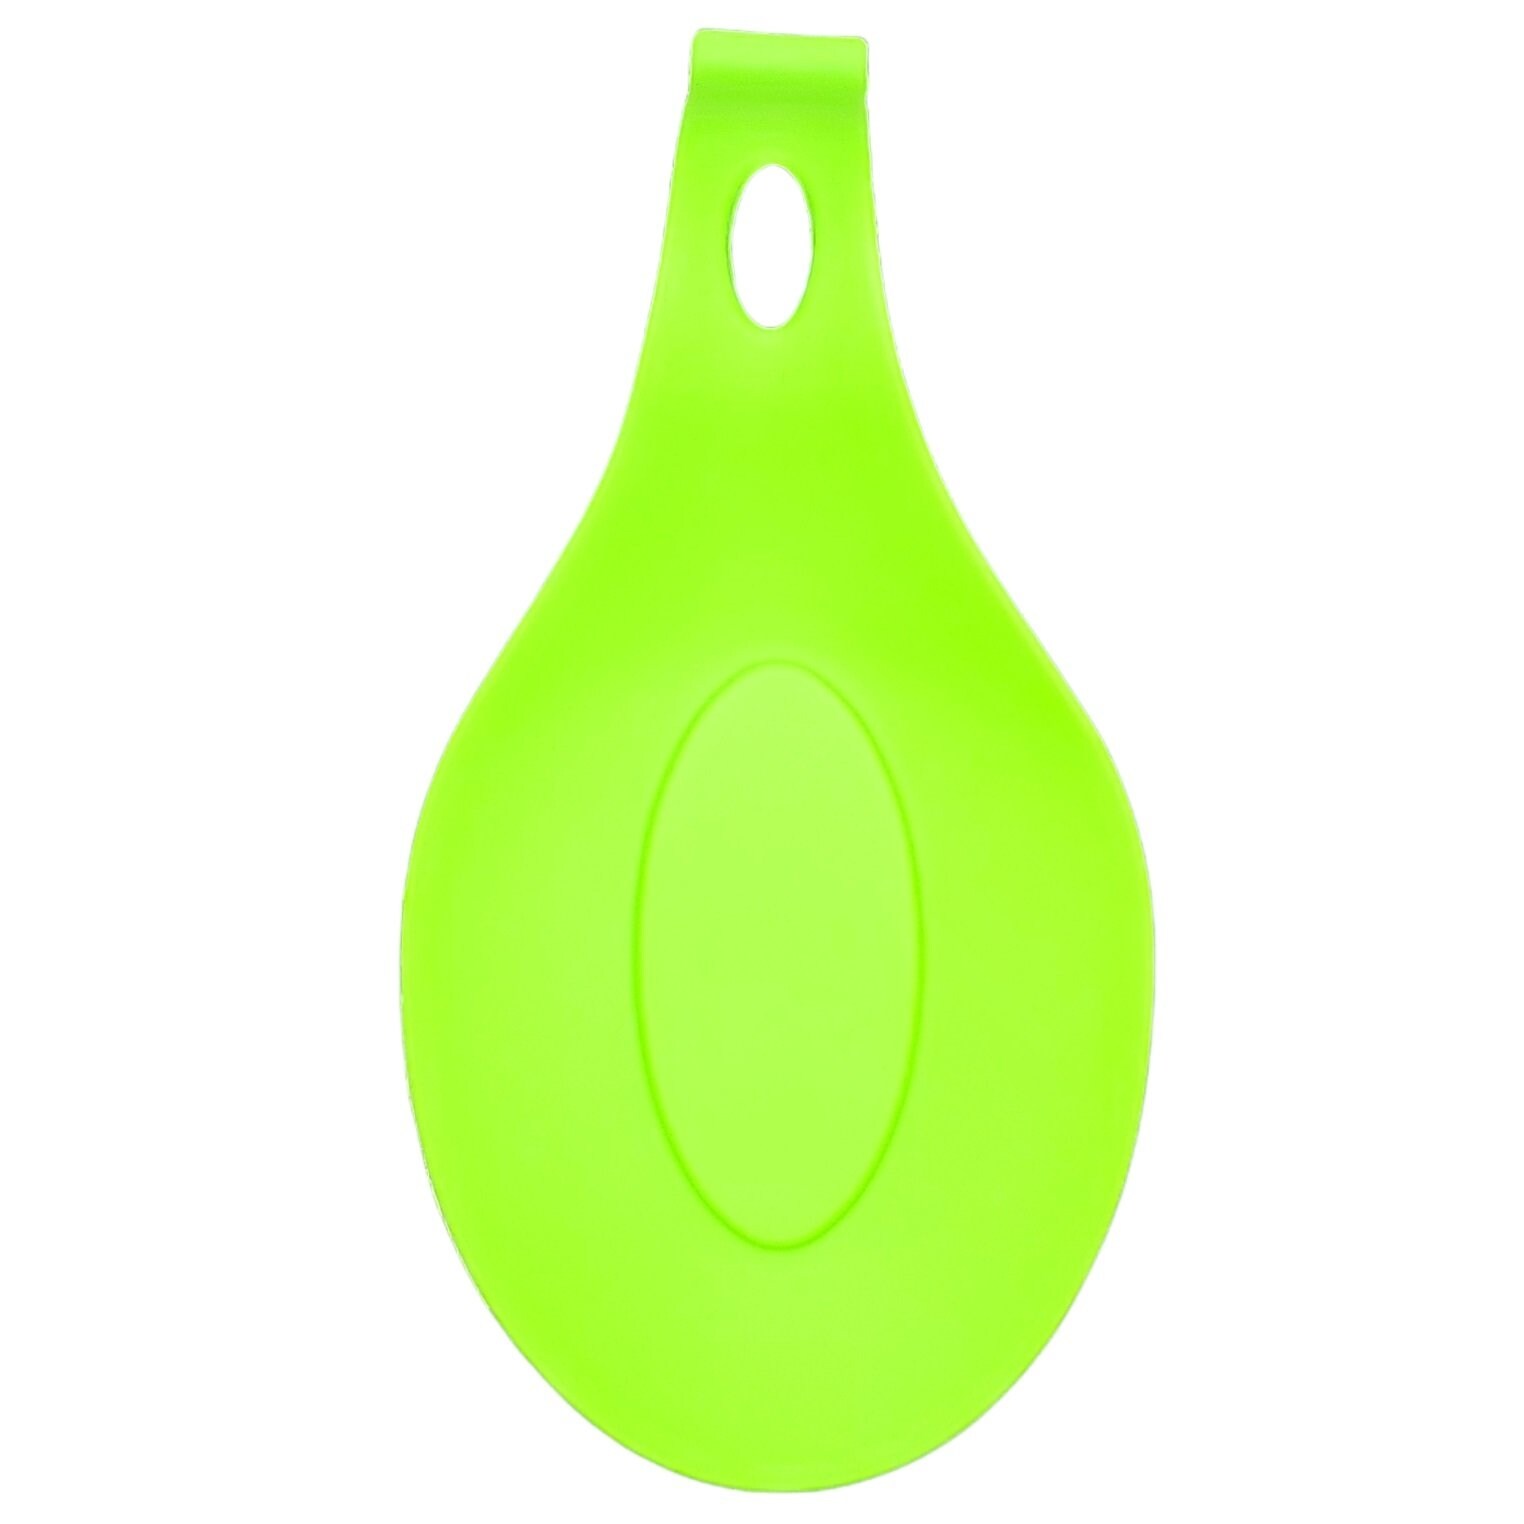 https://ak1.ostkcdn.com/images/products/is/images/direct/8d9a95e6bdbad1268d76120b01c2e3cf630f1789/Handy-Housewares-Jumbo-Flexible-Silicone-Spoon-Rest%2C-Heat-Resistant-Stove-Top-Kitchen-Utensil-Drip-Pad.jpg